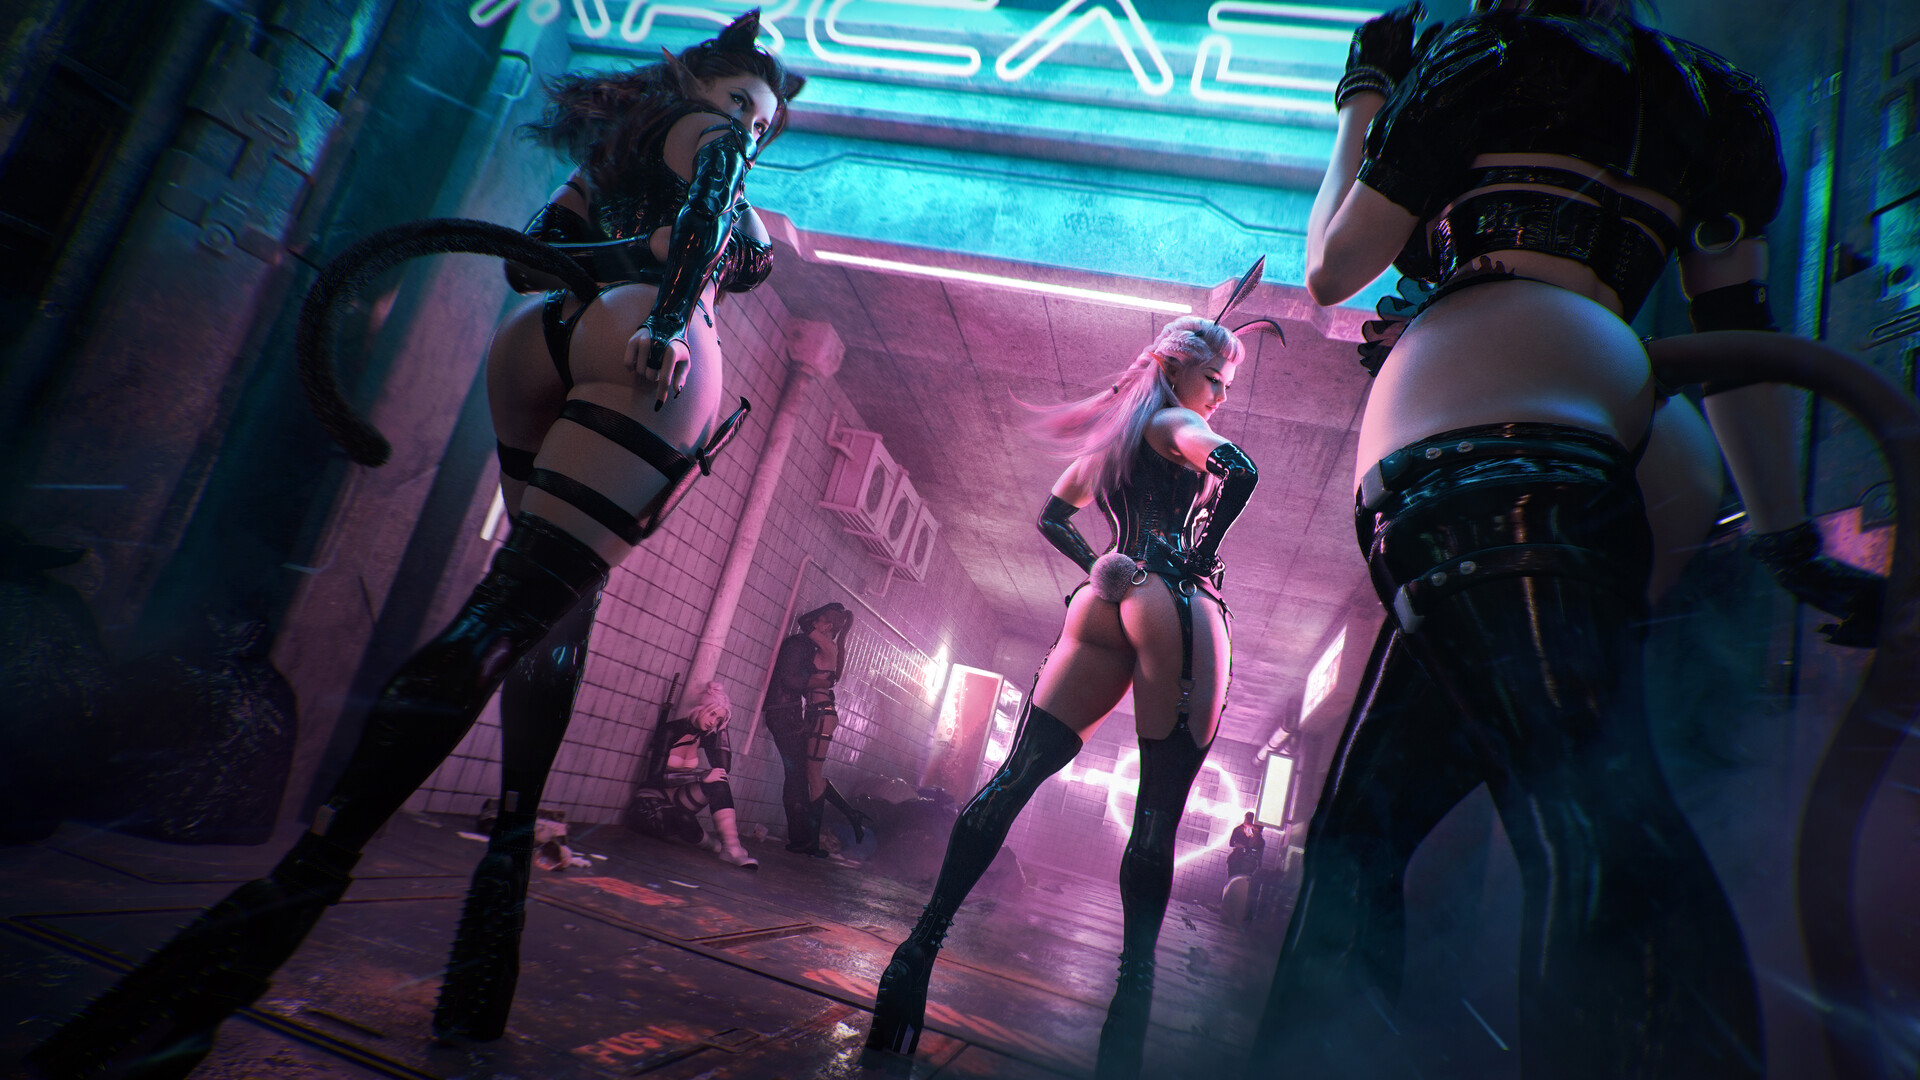 General 1920x1080 digital art artwork illustration street CGI cat girl cat tail latex bunny ears bunny tail ass women low-angle women trio neon high heeled boots gloves group of women Tian Zi fantasy girl latex bodysuit back thighs ArtStation thigh-highs skimpy clothes